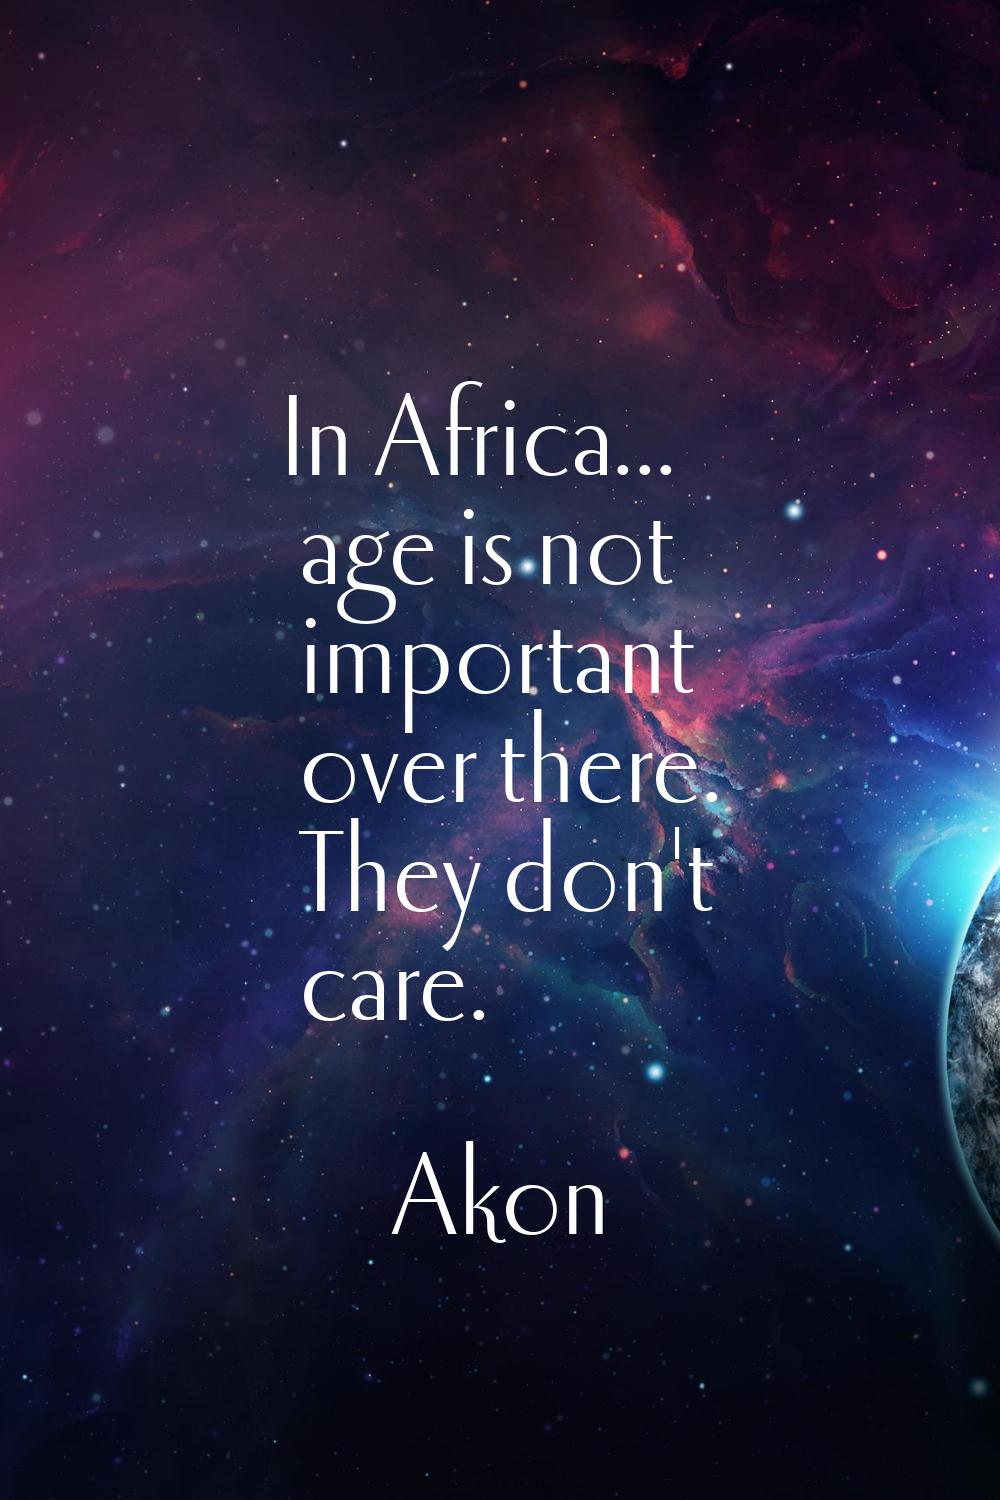 In Africa... age is not important over there. They don't care.